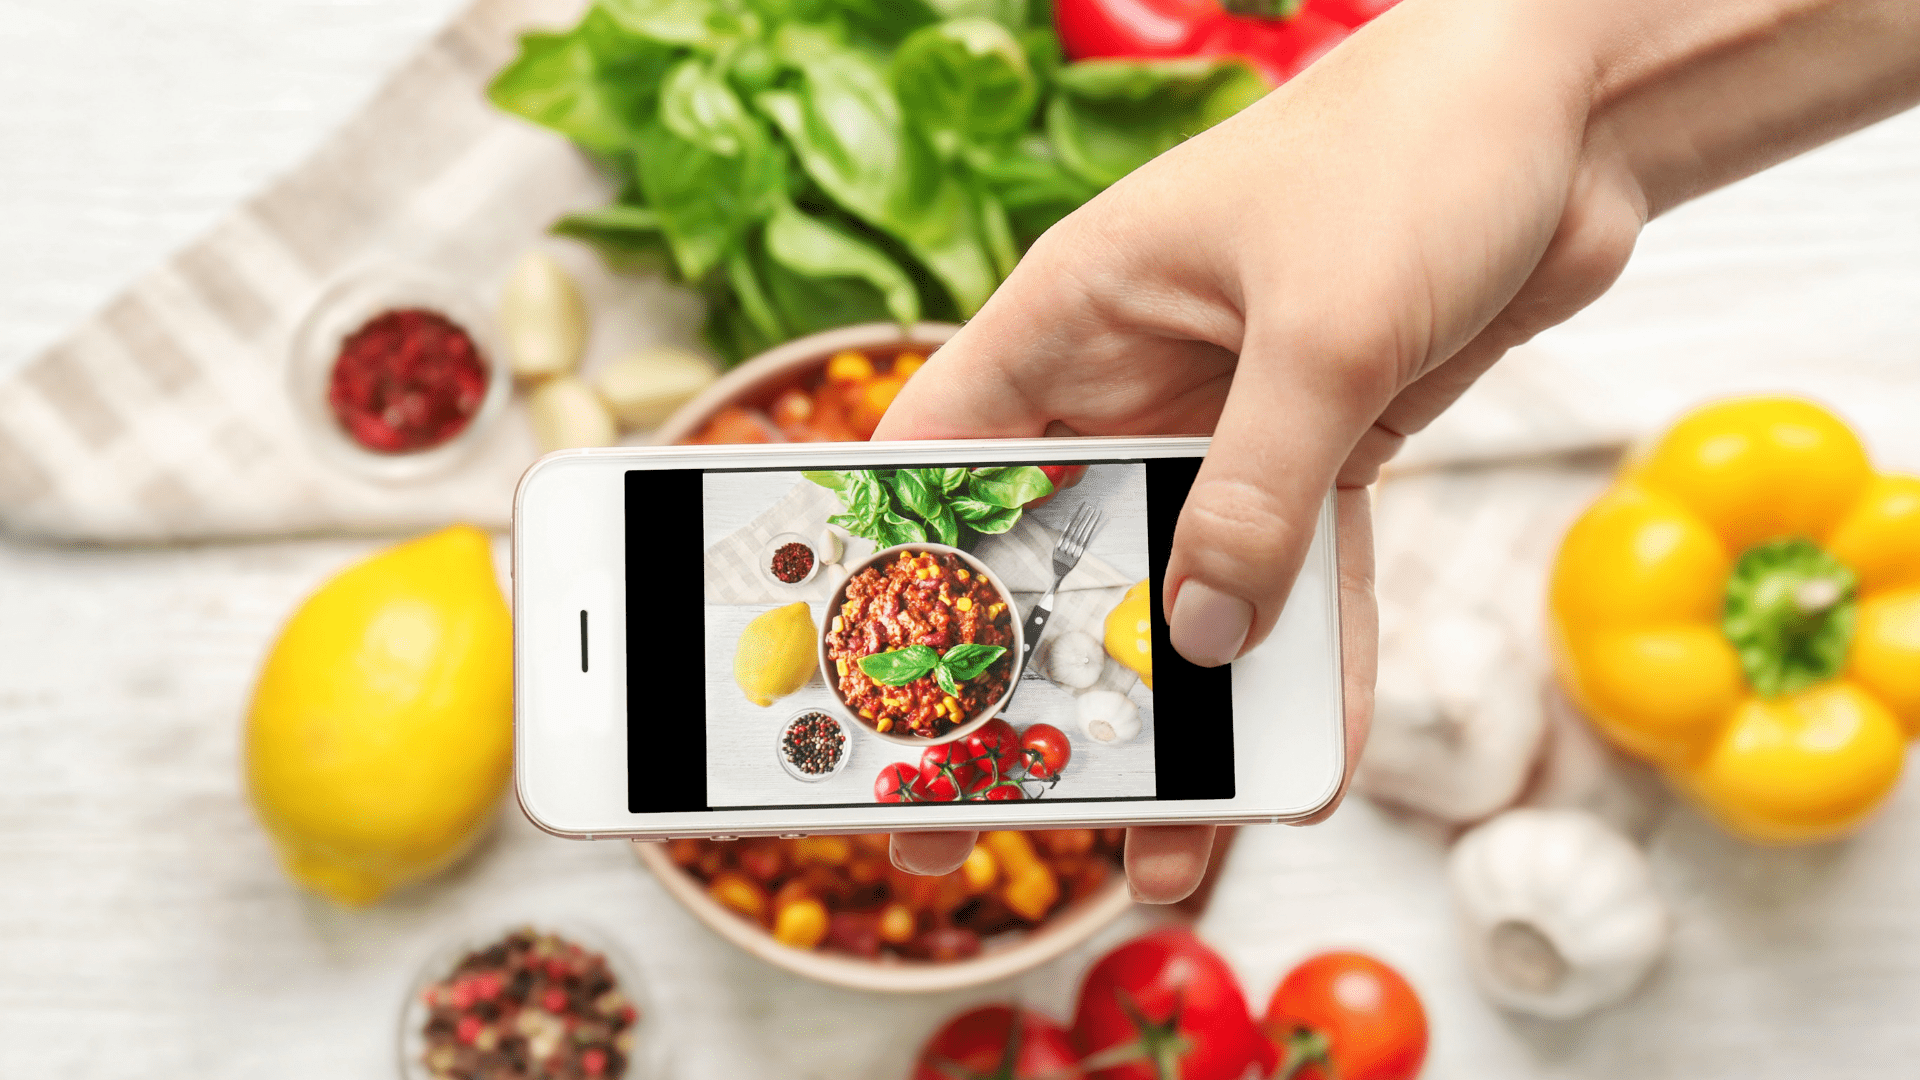 person's hand with smartphone taking a picture of a bowl of pasta with a yellow bell pepper, lemon, tomatoes, garlic, basil, black peppers, and fork surrounding it